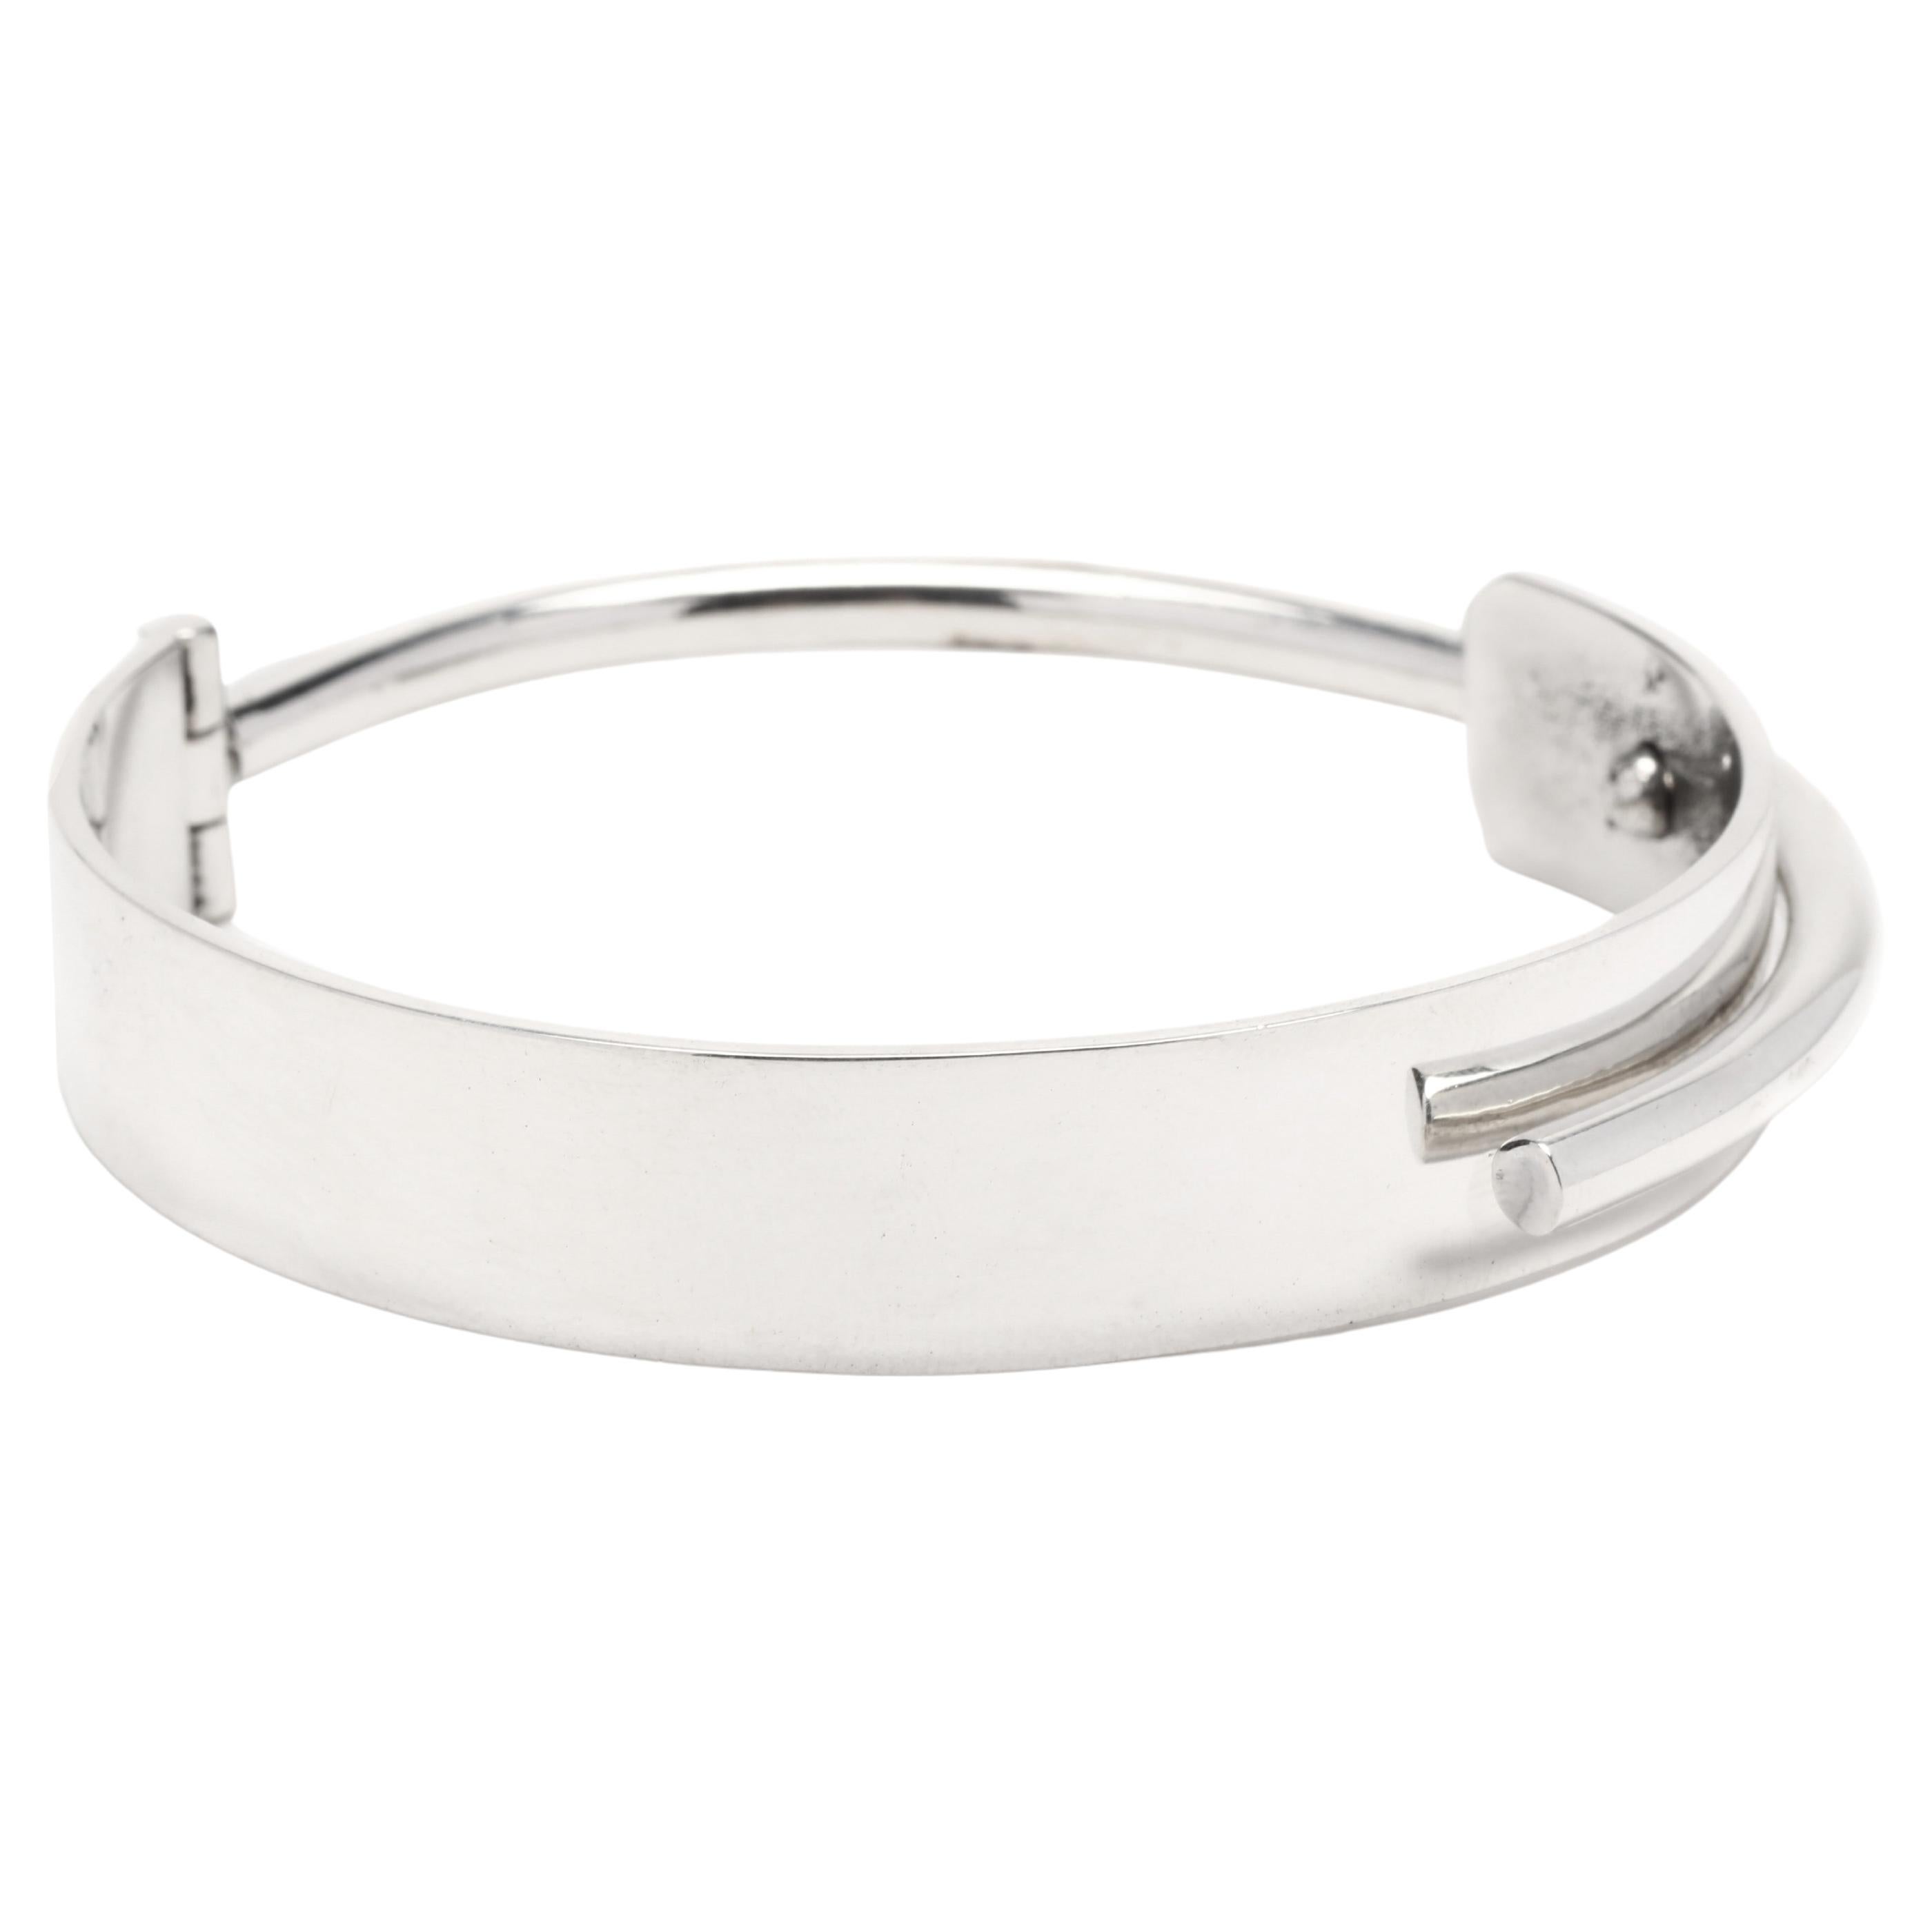 Mexican Escorcia Modern Hinged Bangle Bracelet, Sterling Silver For Sale